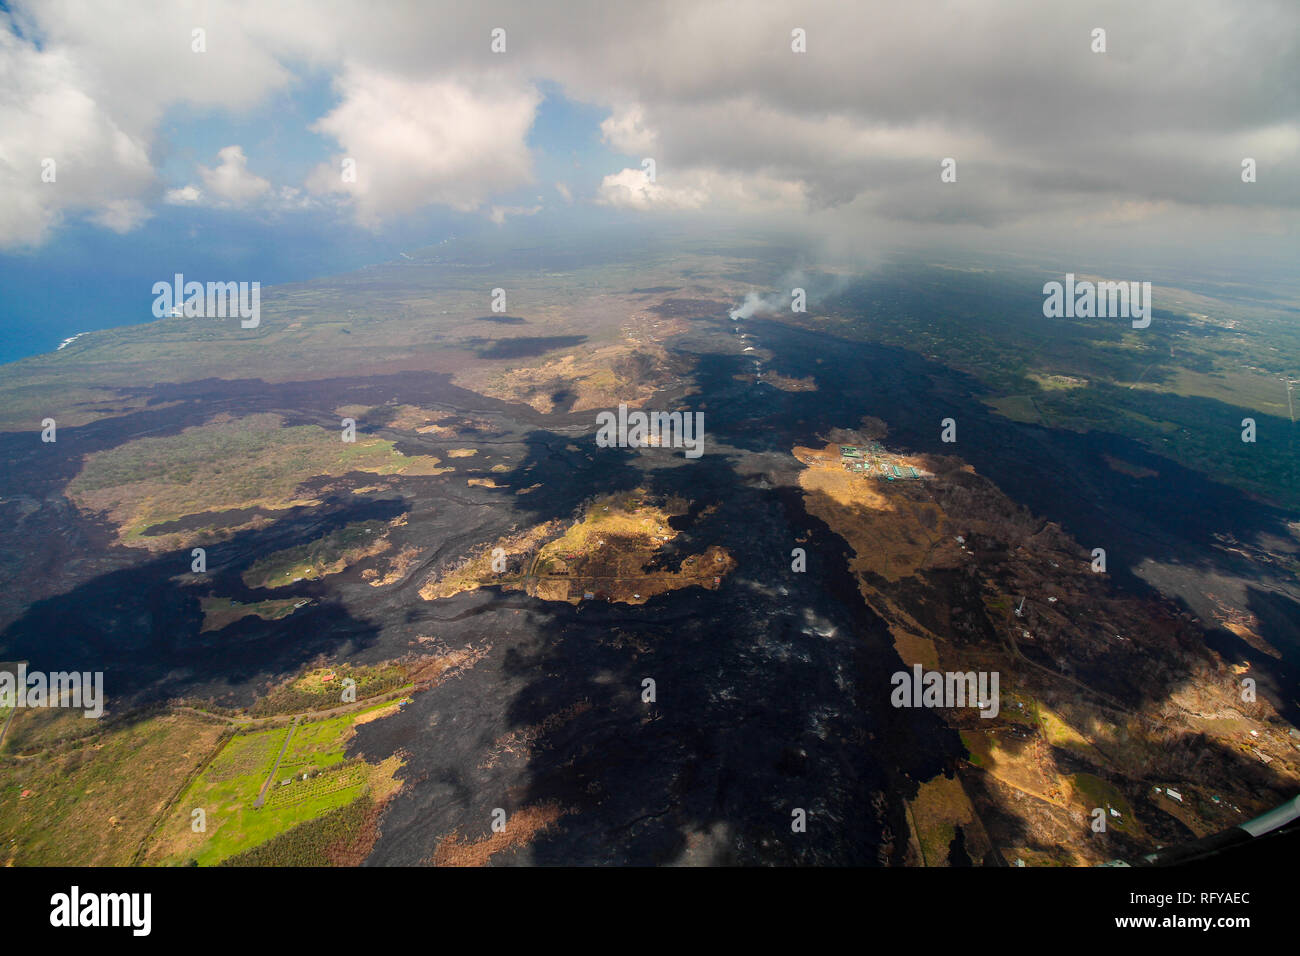 Bird view image showing Big Island, Hawaii, at the Volcano National Park after the volcano disruption of 2018 Stock Photo